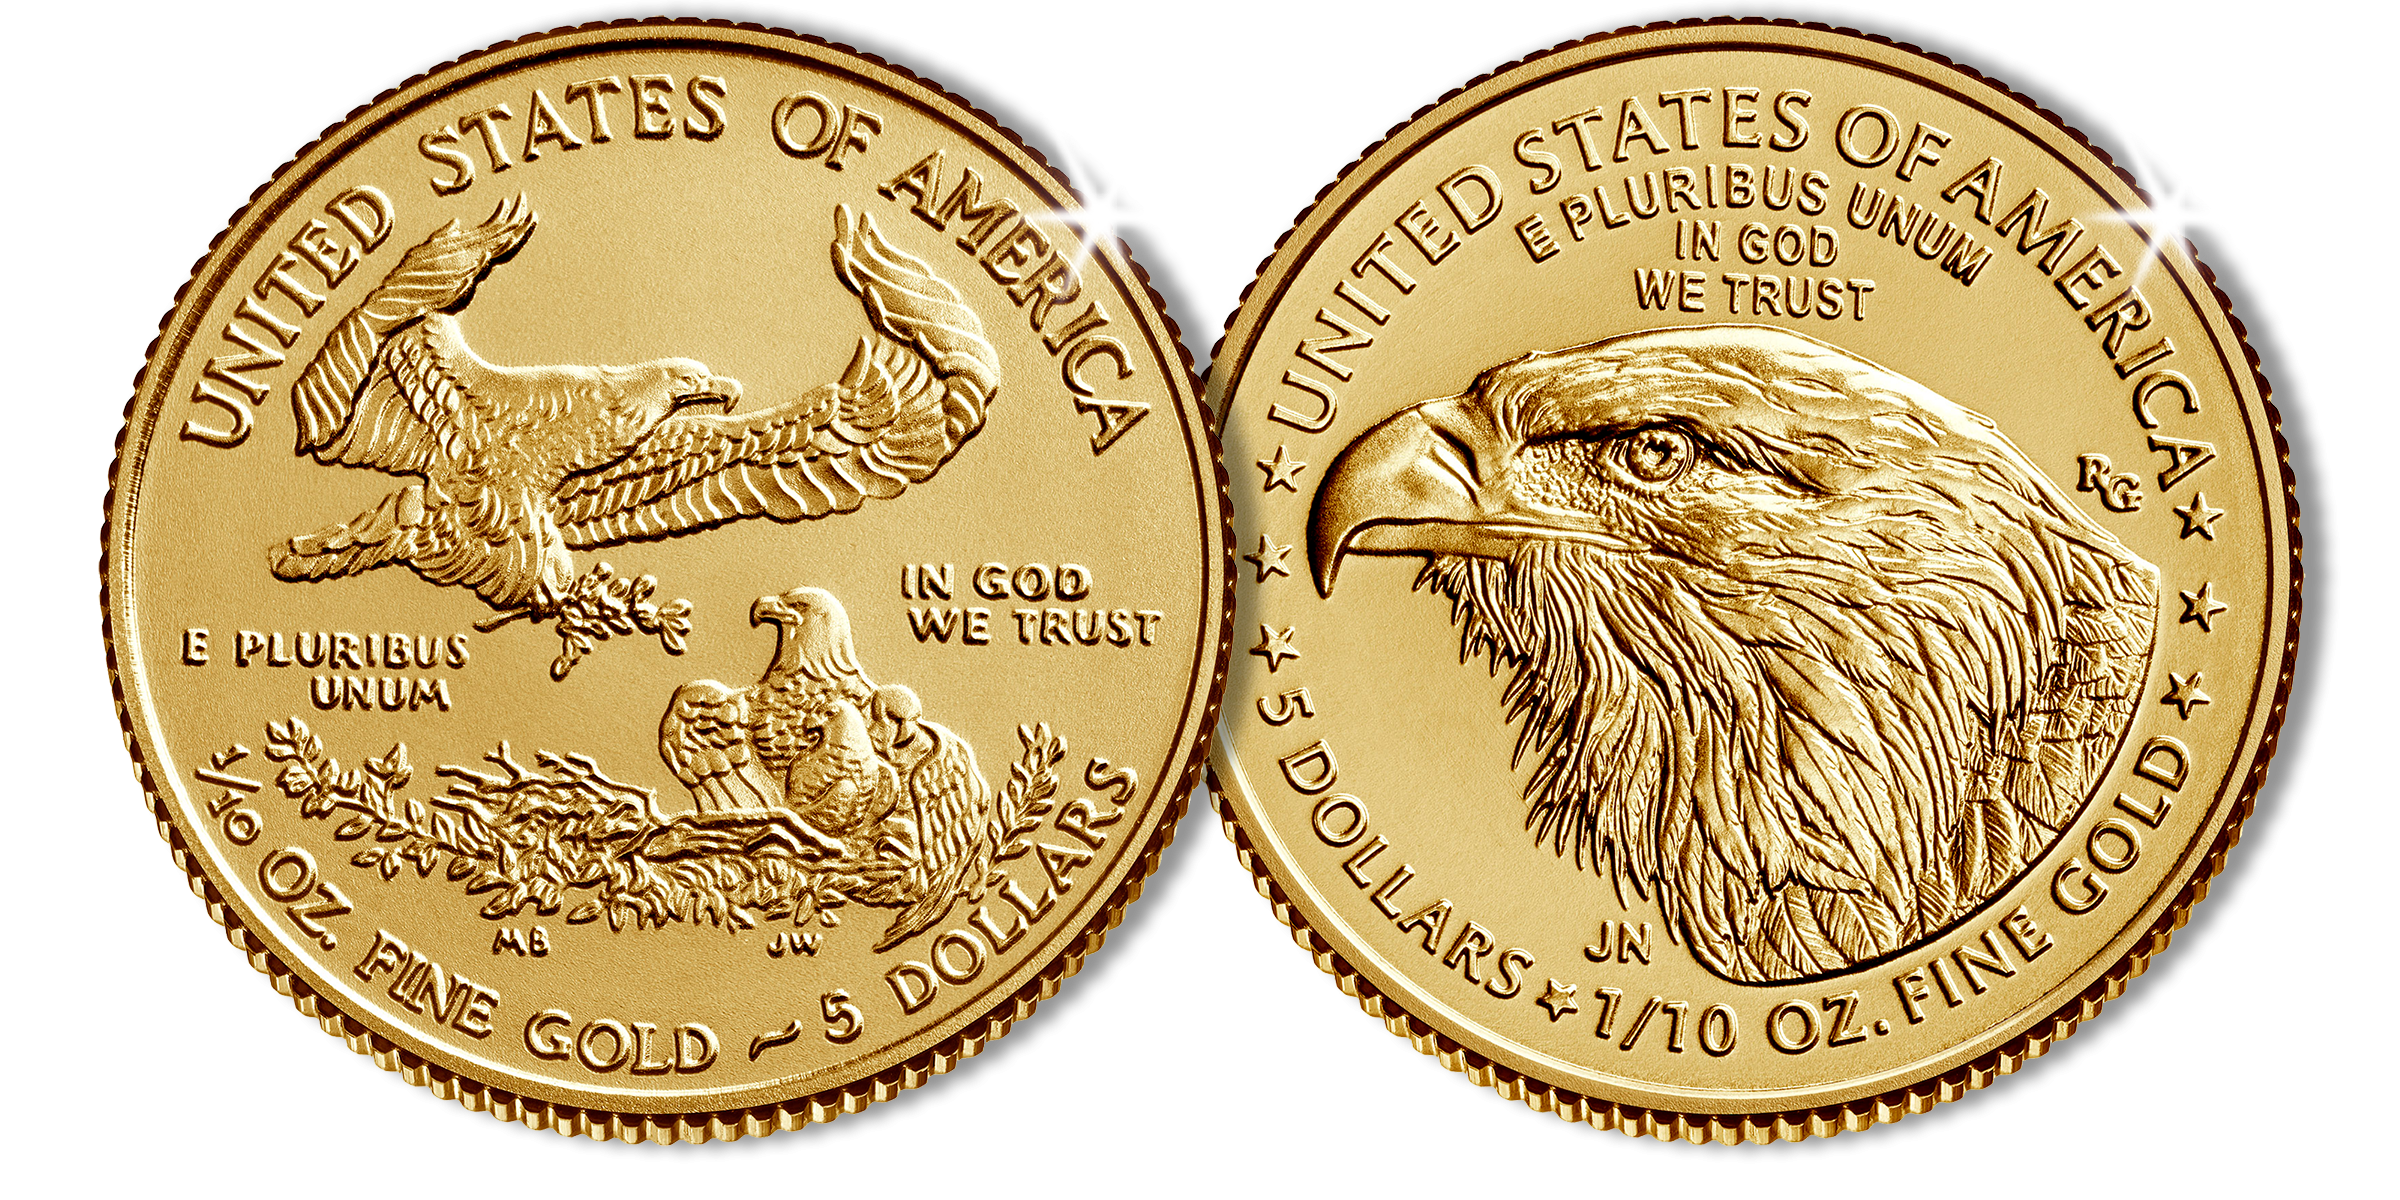 Legendary Gold Eagle Two-Coin Set honouring 35th anniversary with Original and Brand New Design 